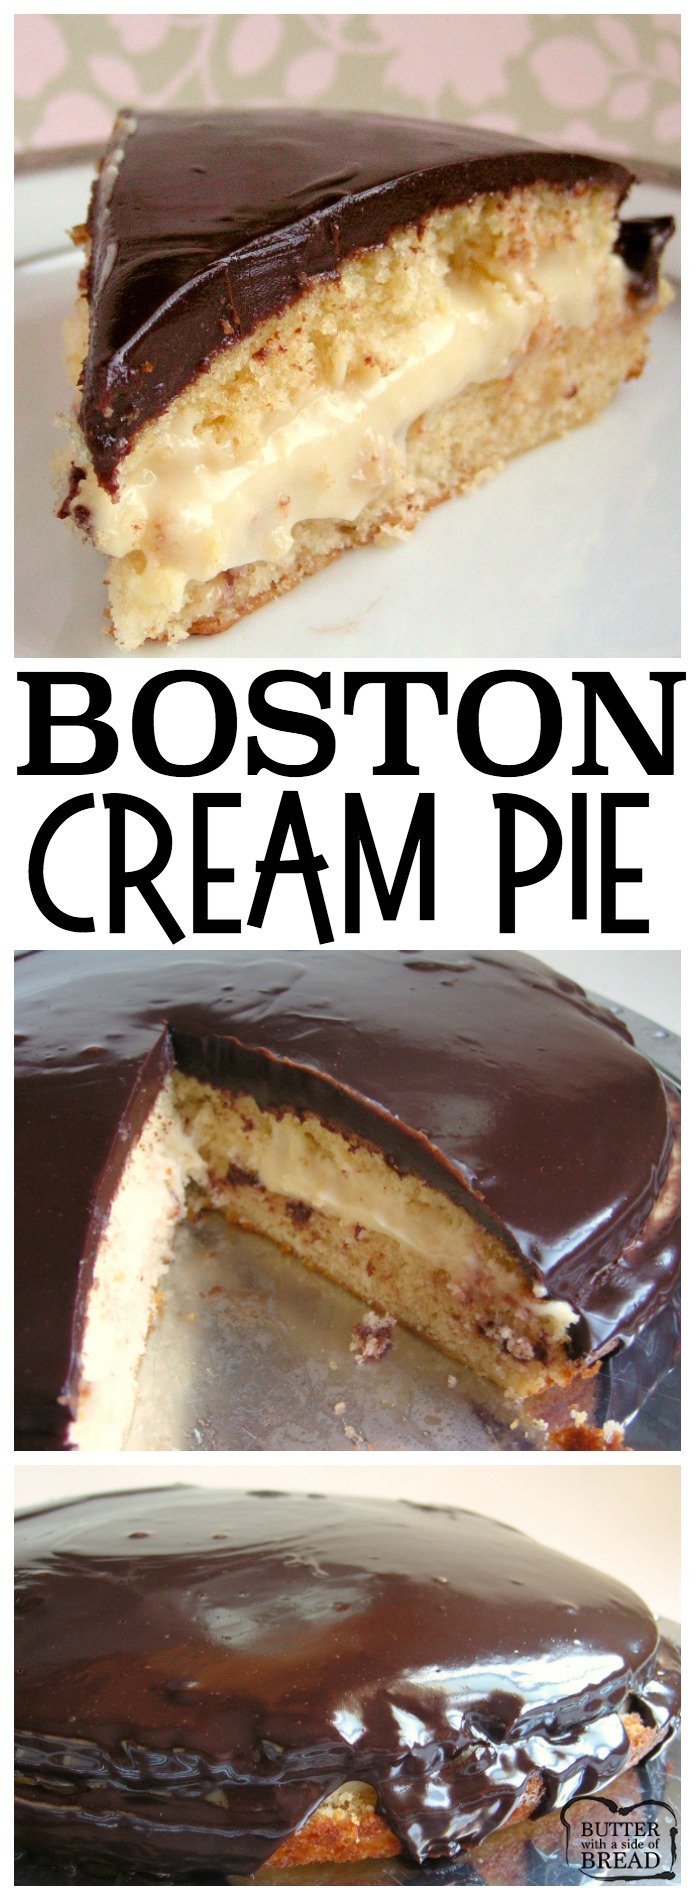 Boston Cream Pie made from scratch in your own kitchen! Step by step instructions on how to make vanilla custard, easy single layer cake and smooth, rich chocolate ganache for this classic Boston Cream Pie recipe. Layer it all together and you've got a show stopping dessert that tastes incredible. Easy Boston Creme Pie recipe from Butter With A Side of Bread #dessert #custard #chocolate #cake #pie #BostonCreamPie #food #recipe #homemade